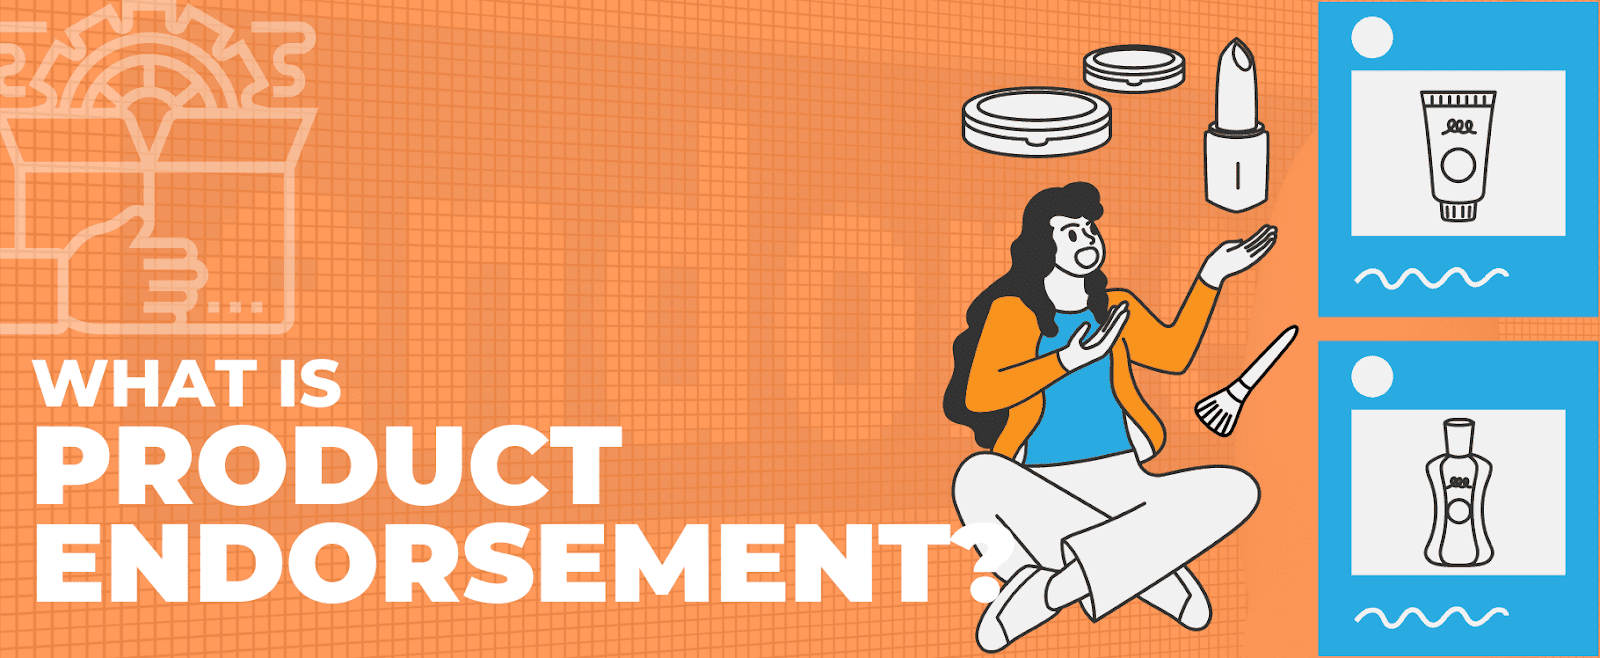 DEFINITION: What Is Product Endorsement? Strategy Explained